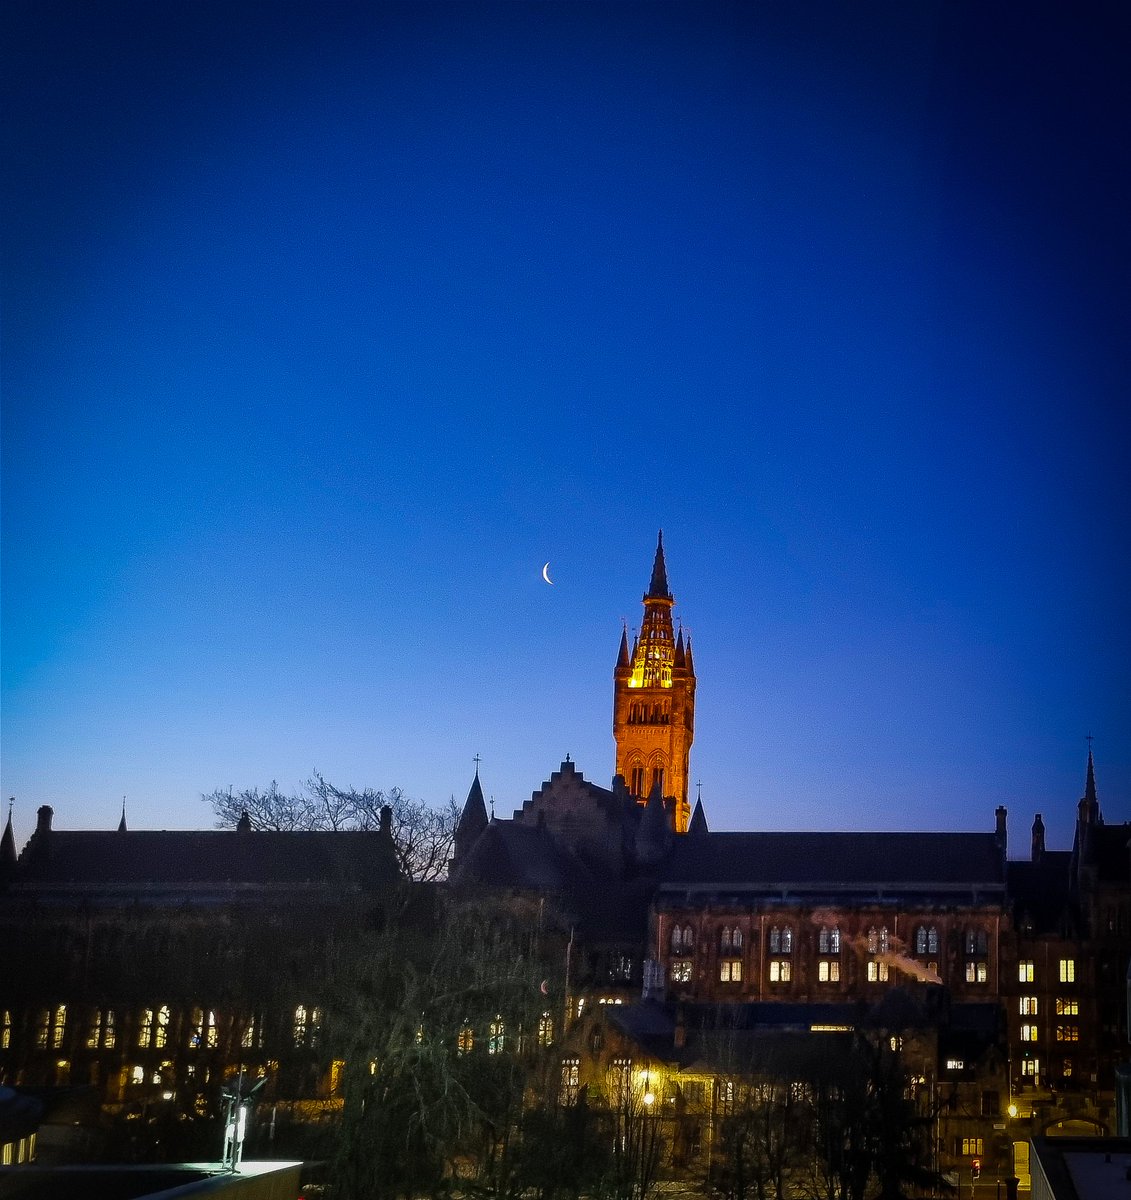 Crisp and chilly early start on campus 🎓📷 @UofGlasgow 
#uofglasgow #univeristyofglasgow #Glasgow #glasgowwestend #westendglasgow #glasgowuniversity #glasgowuni